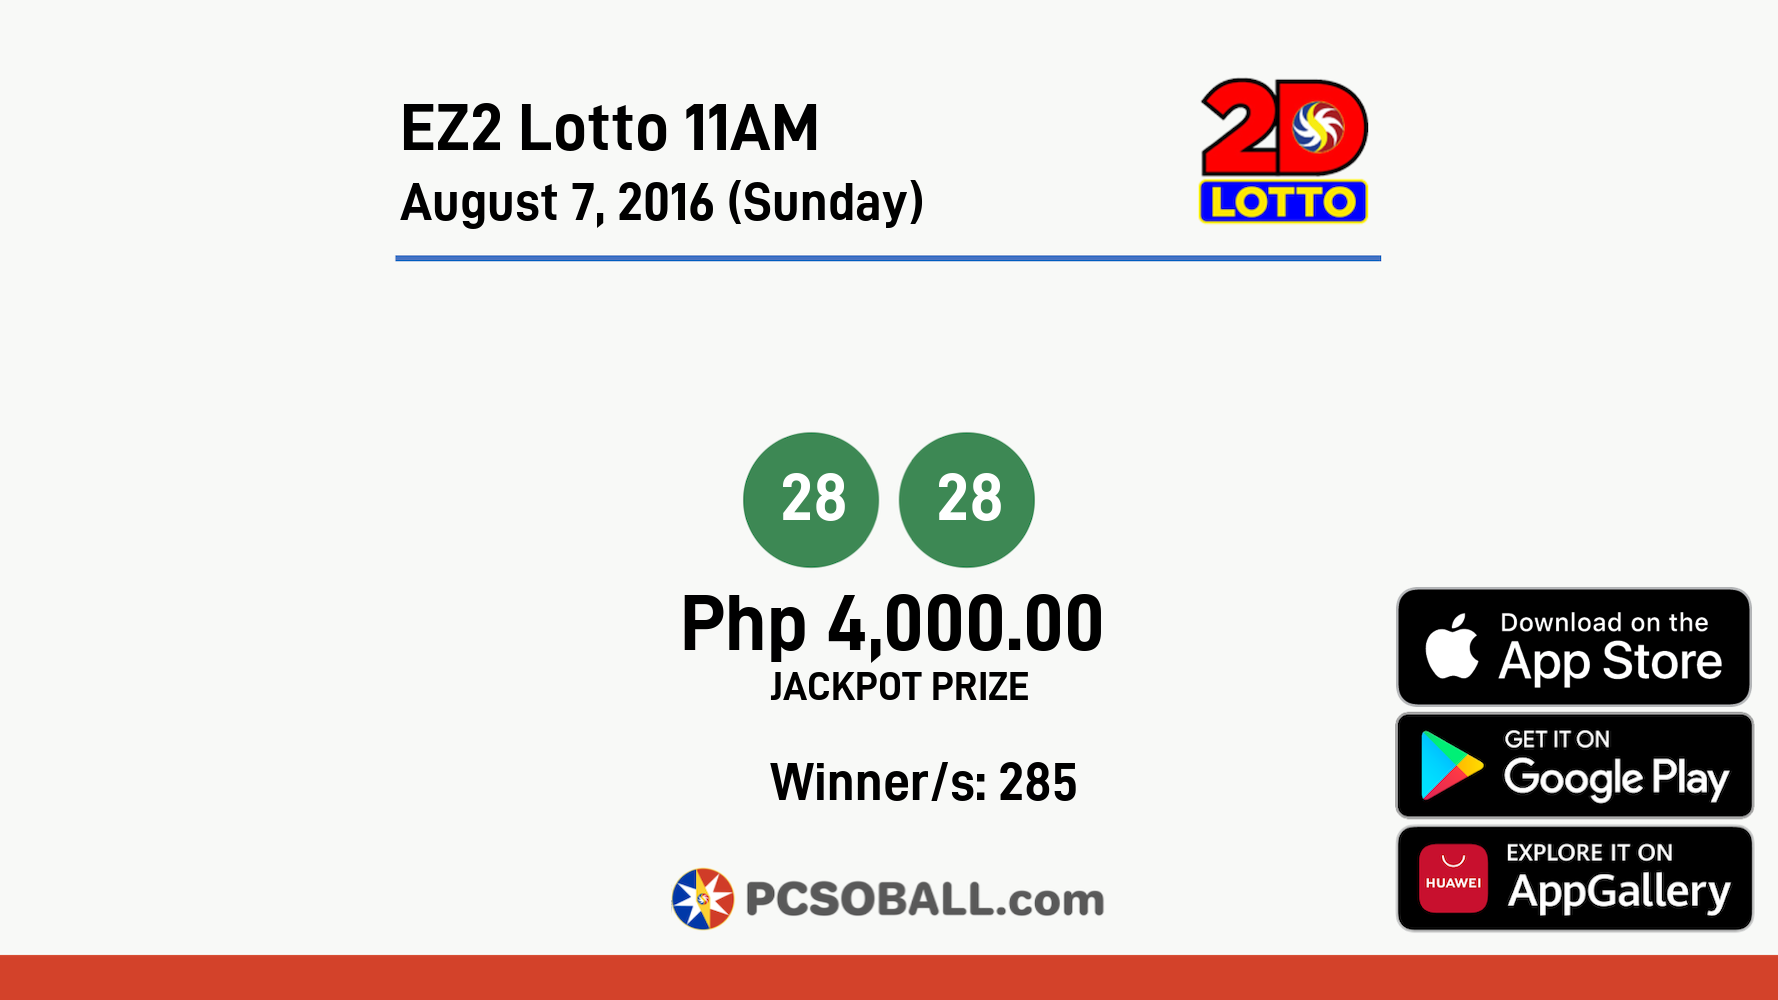 EZ2 Lotto 11AM August 7, 2016 (Sunday) Result